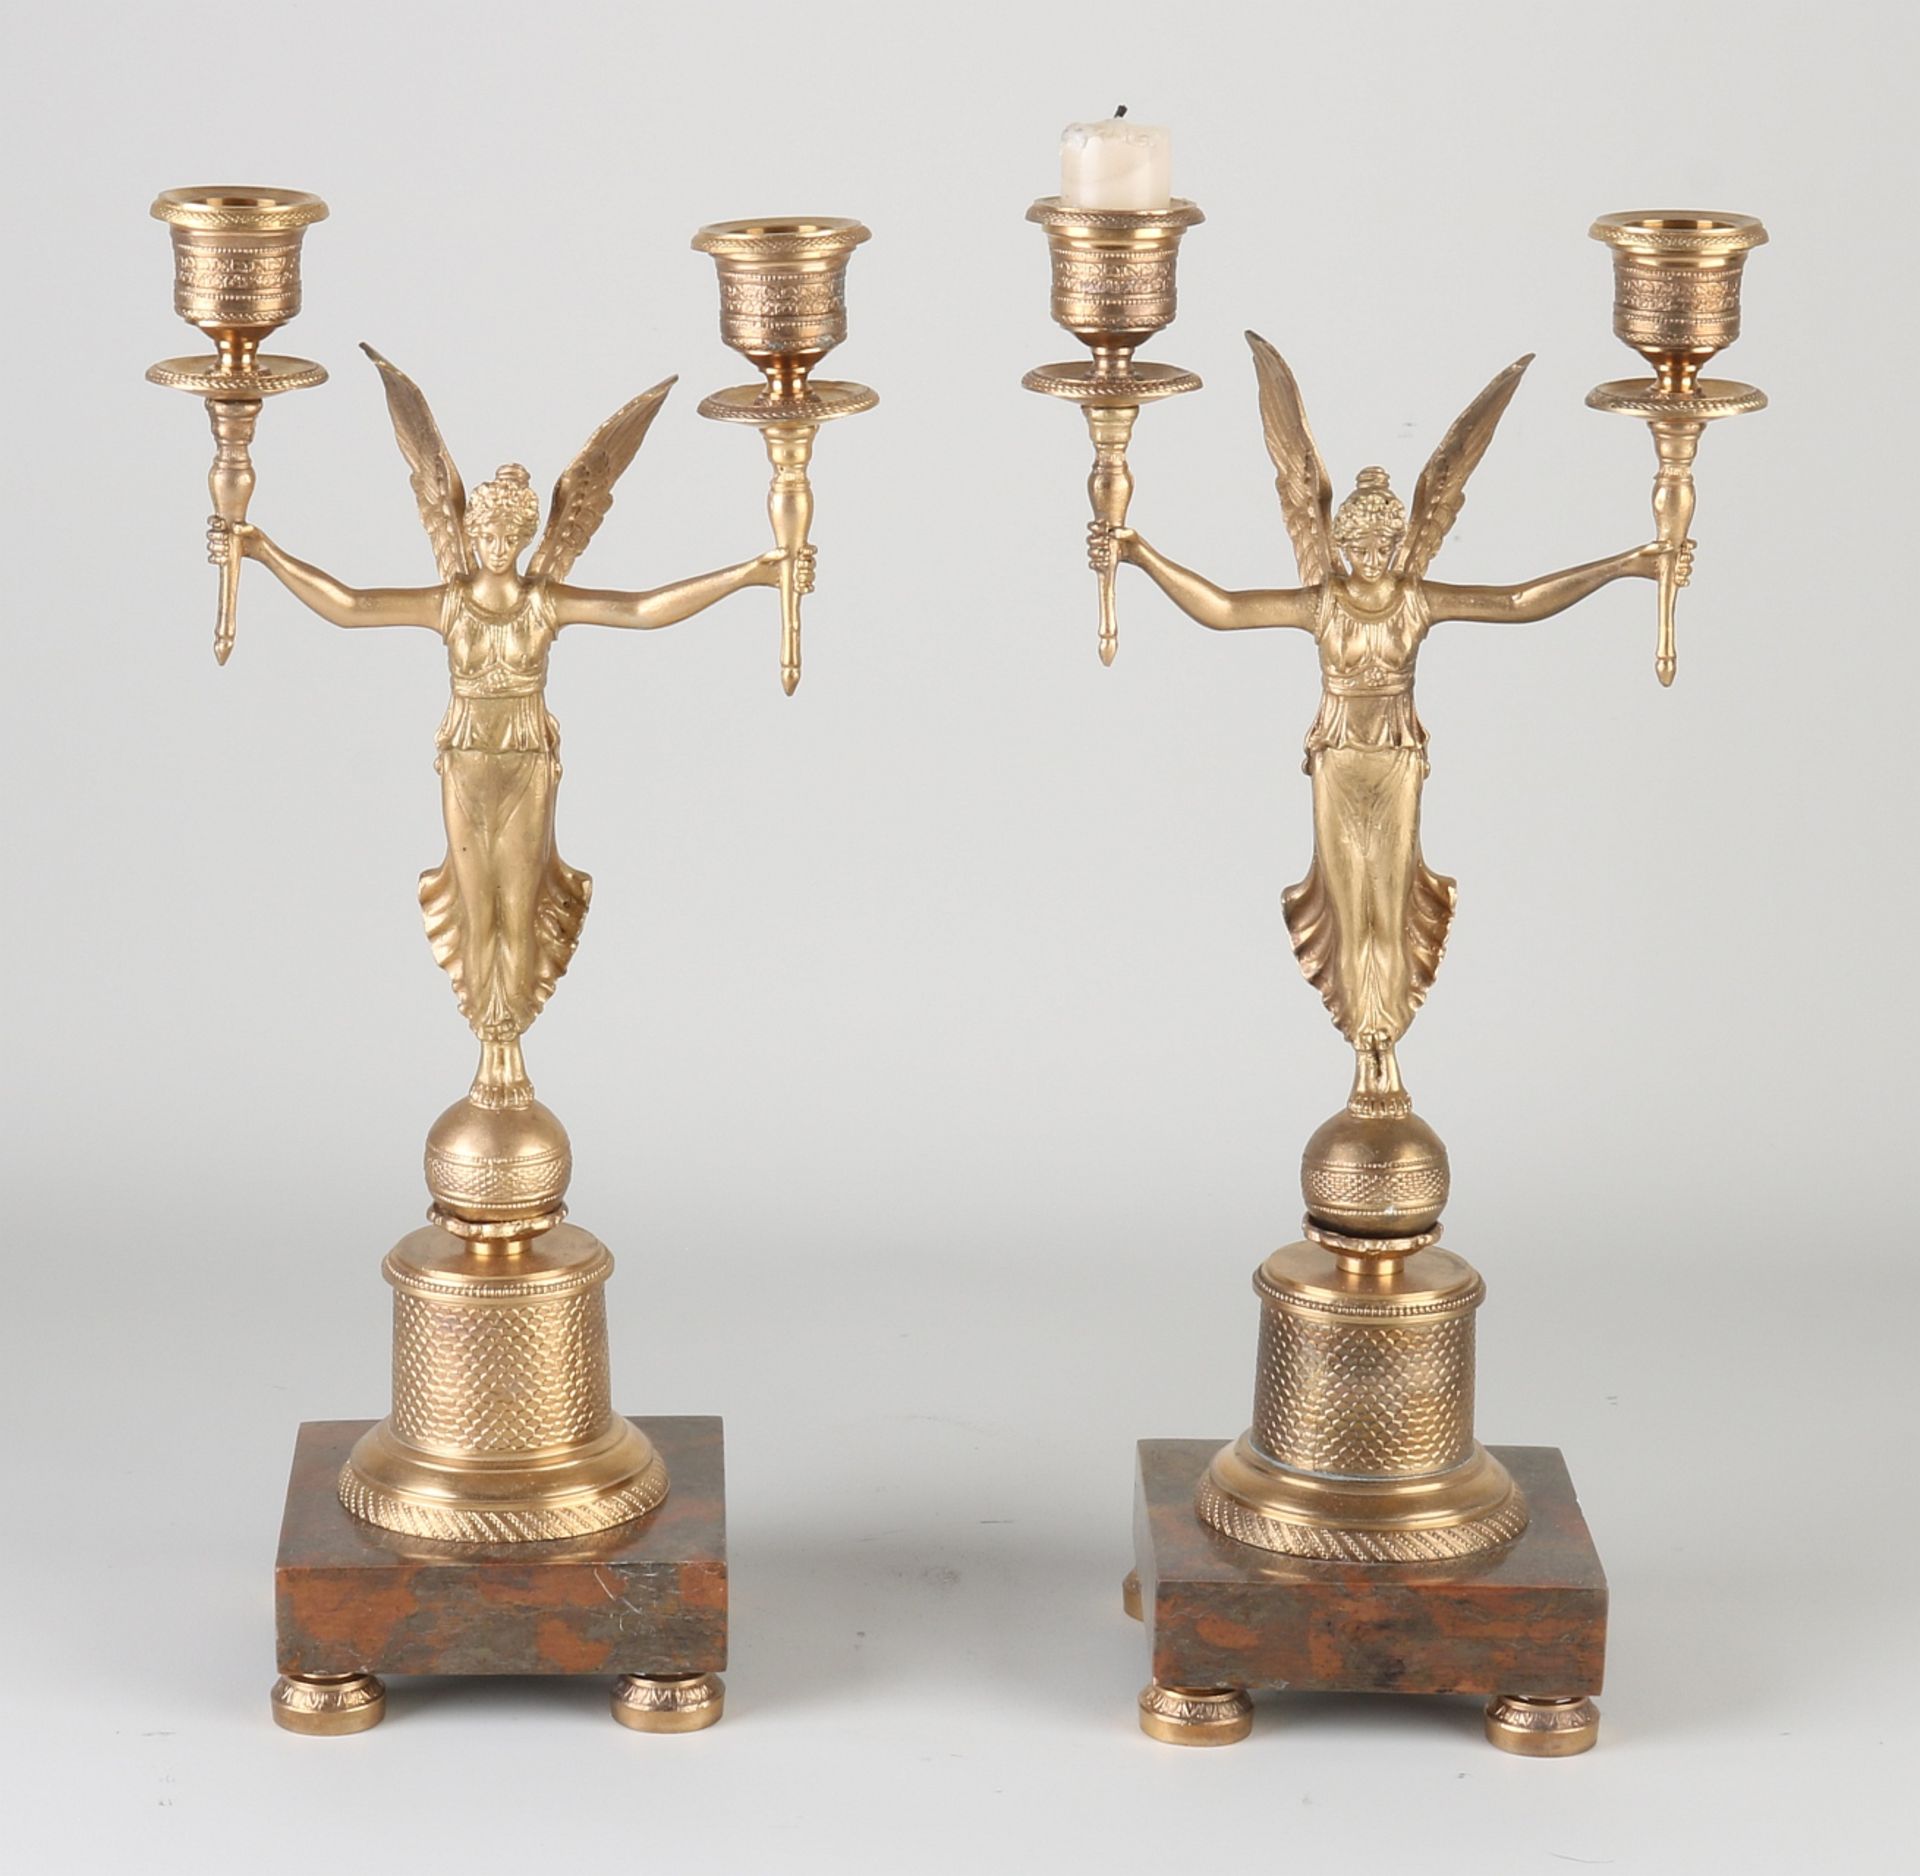 Two bronze empire style candlesticks